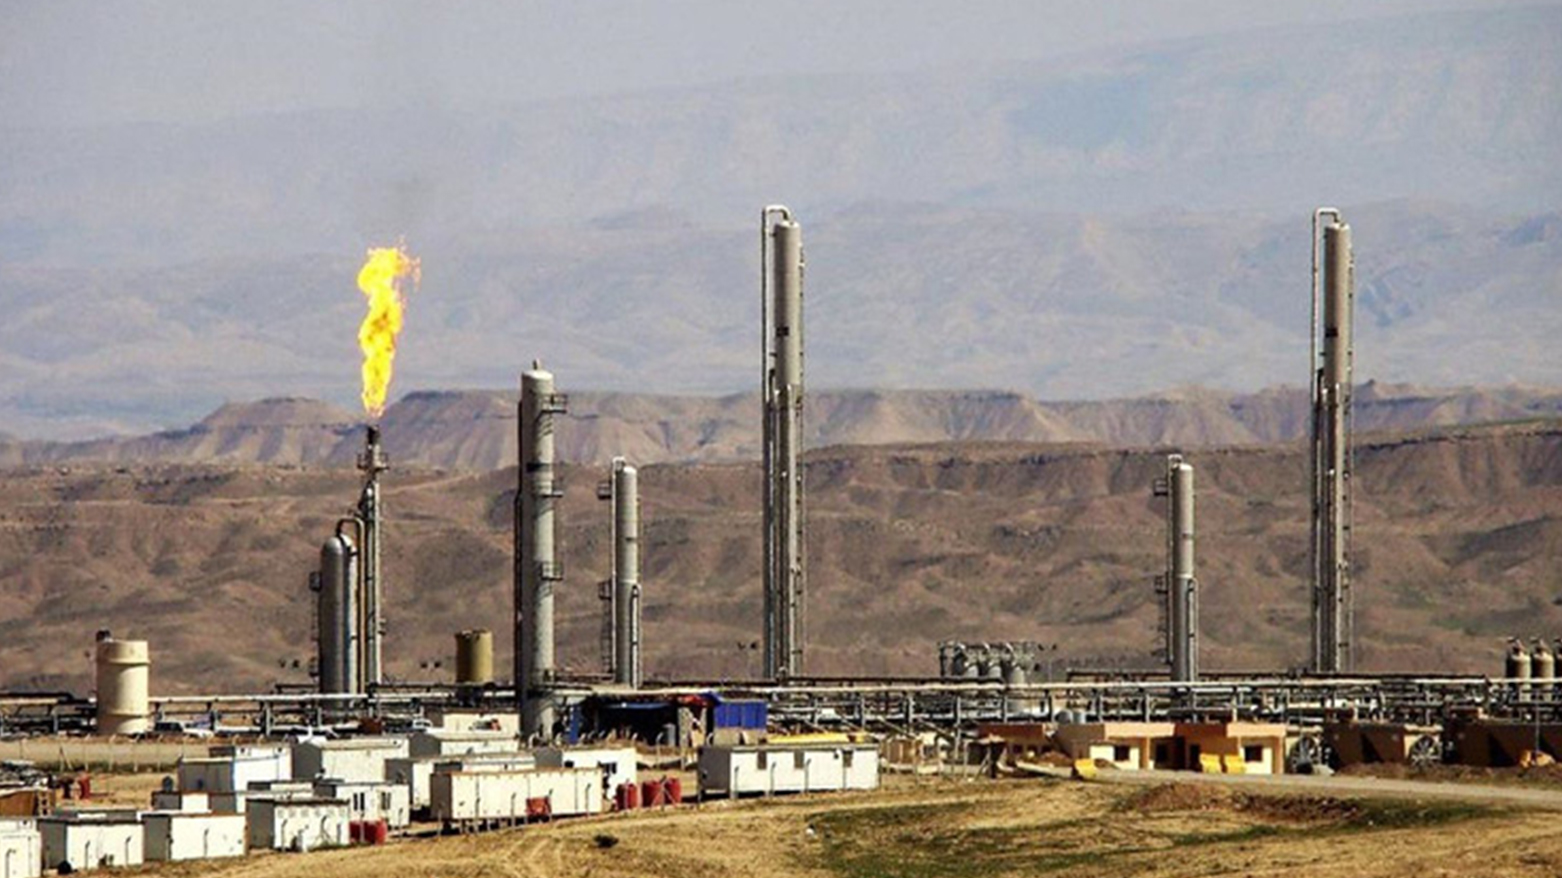 Drone strikes gas field in Sulaimani province